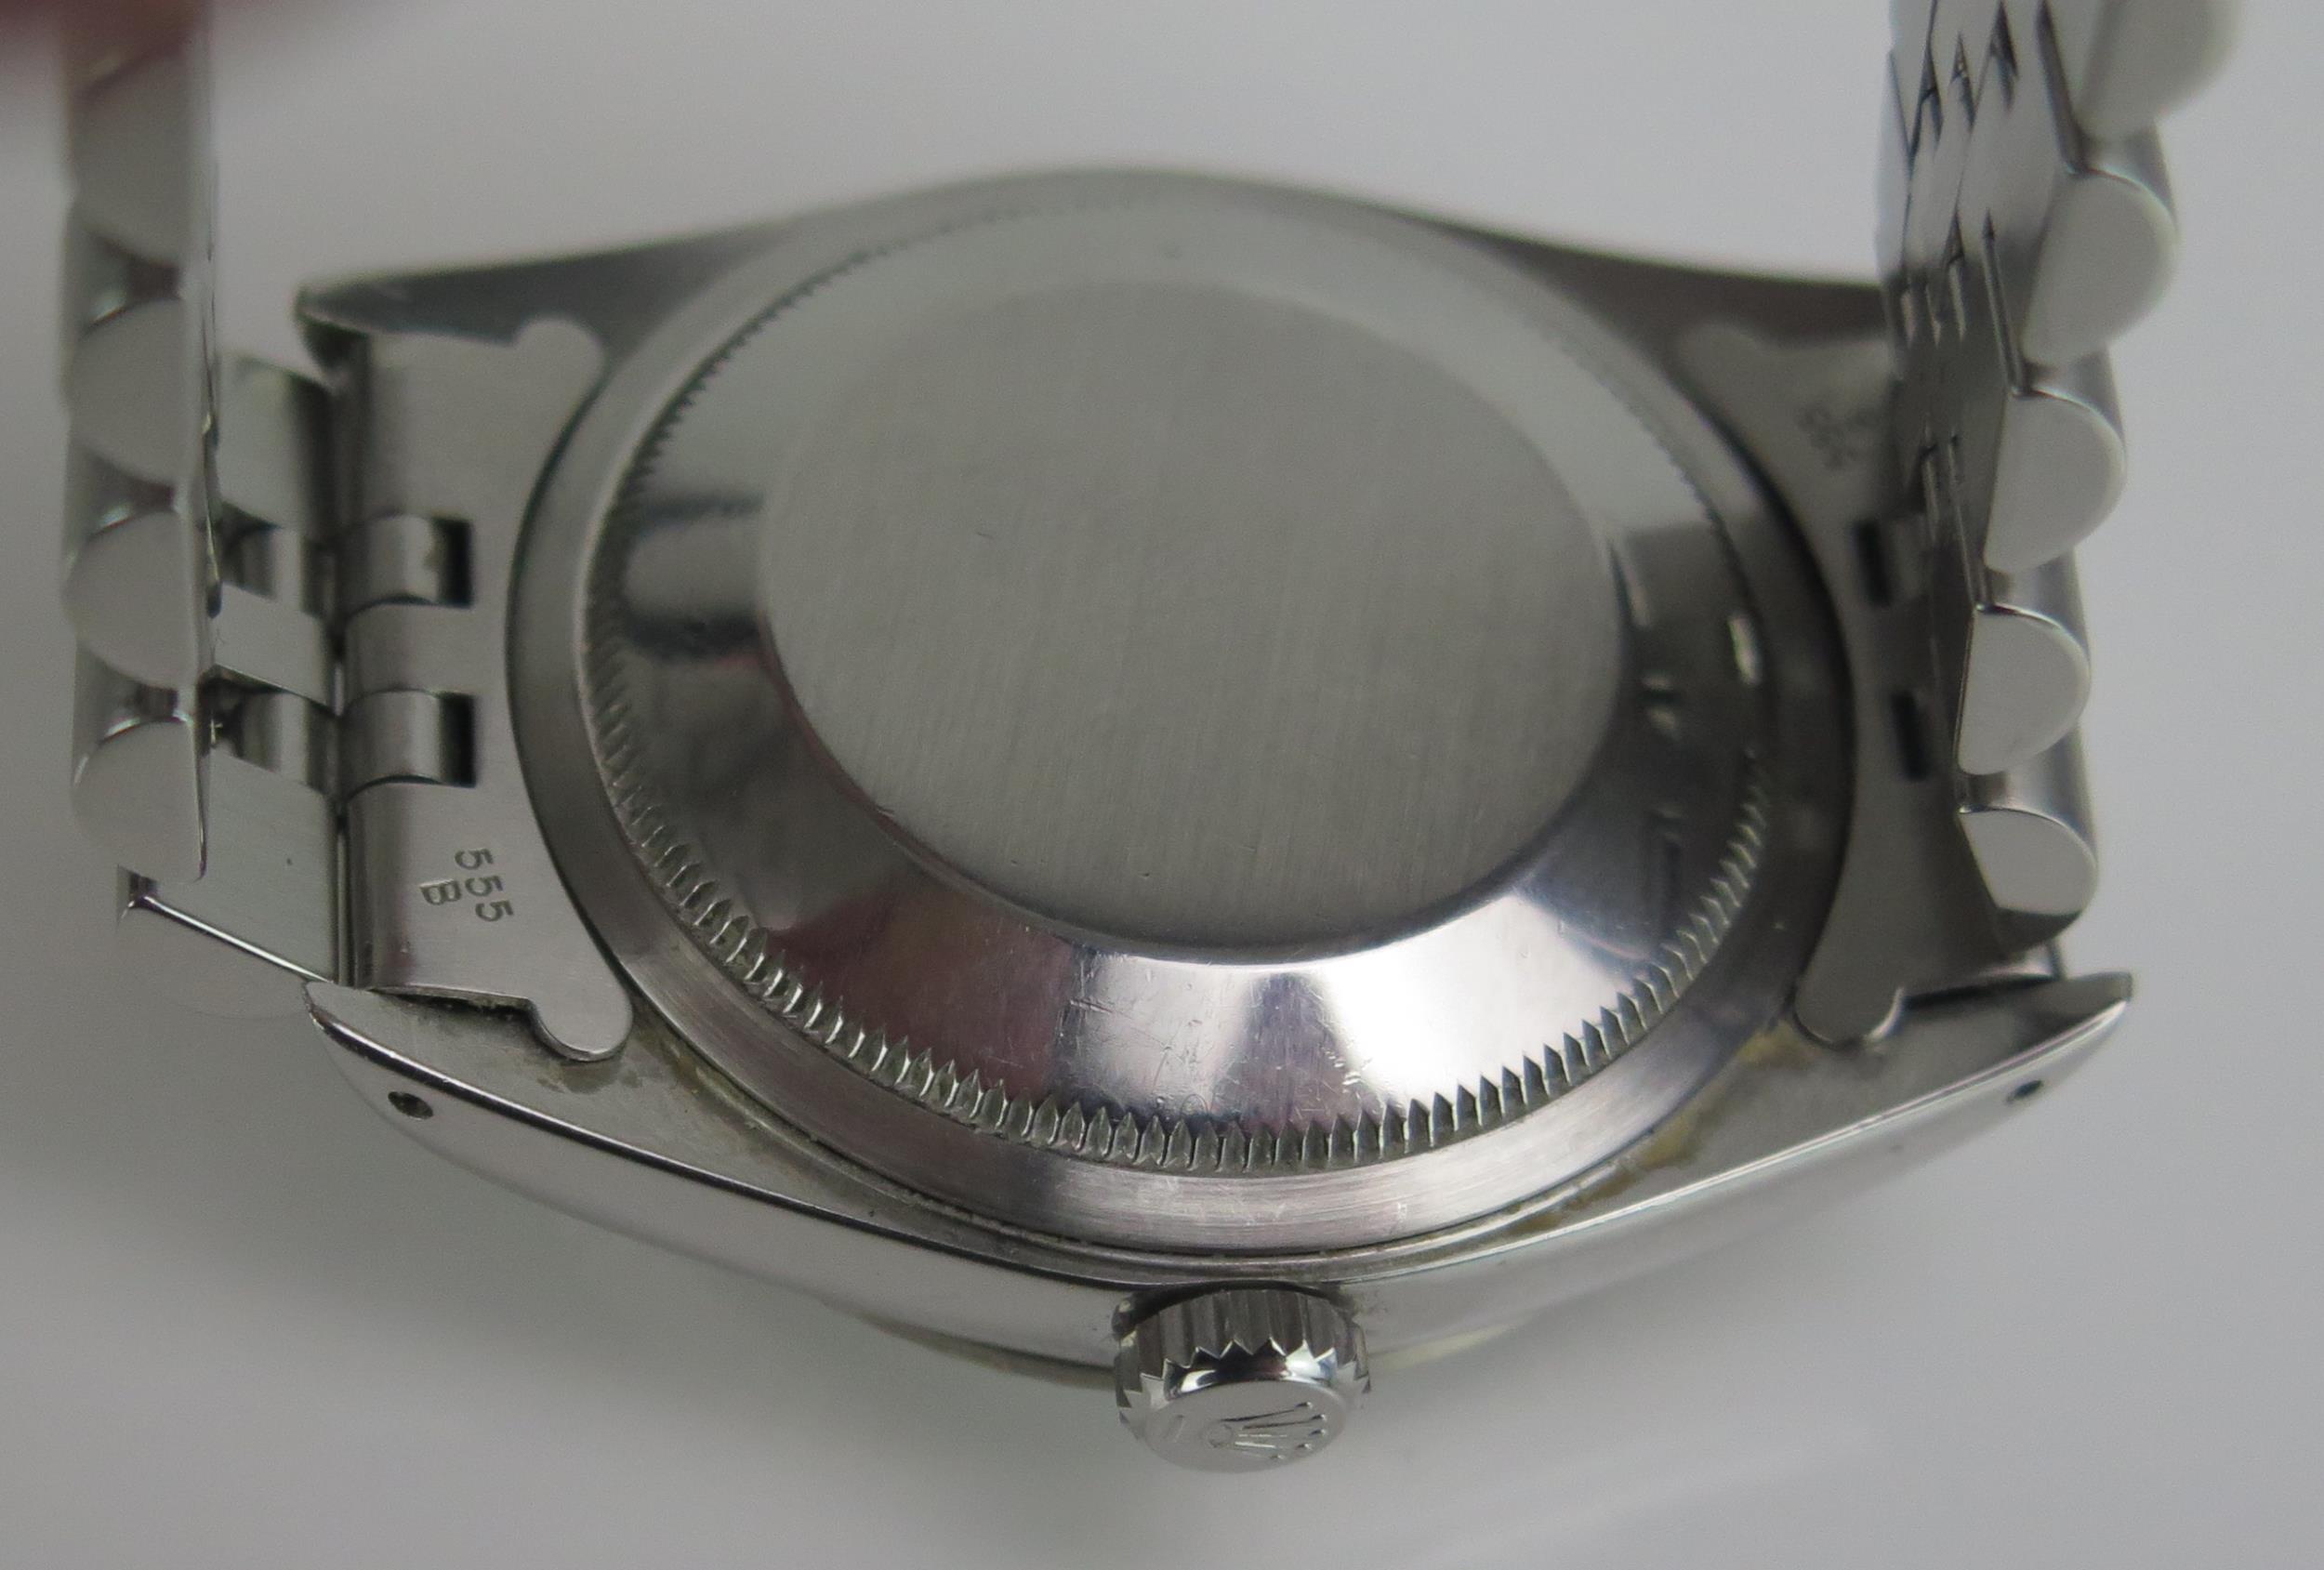 A ROLEX Gent's Oyster Perpetual Datejust S.C.O.C. Steel Cased Wristwatch on a 63600 Jubilee Bracelet - Image 9 of 10